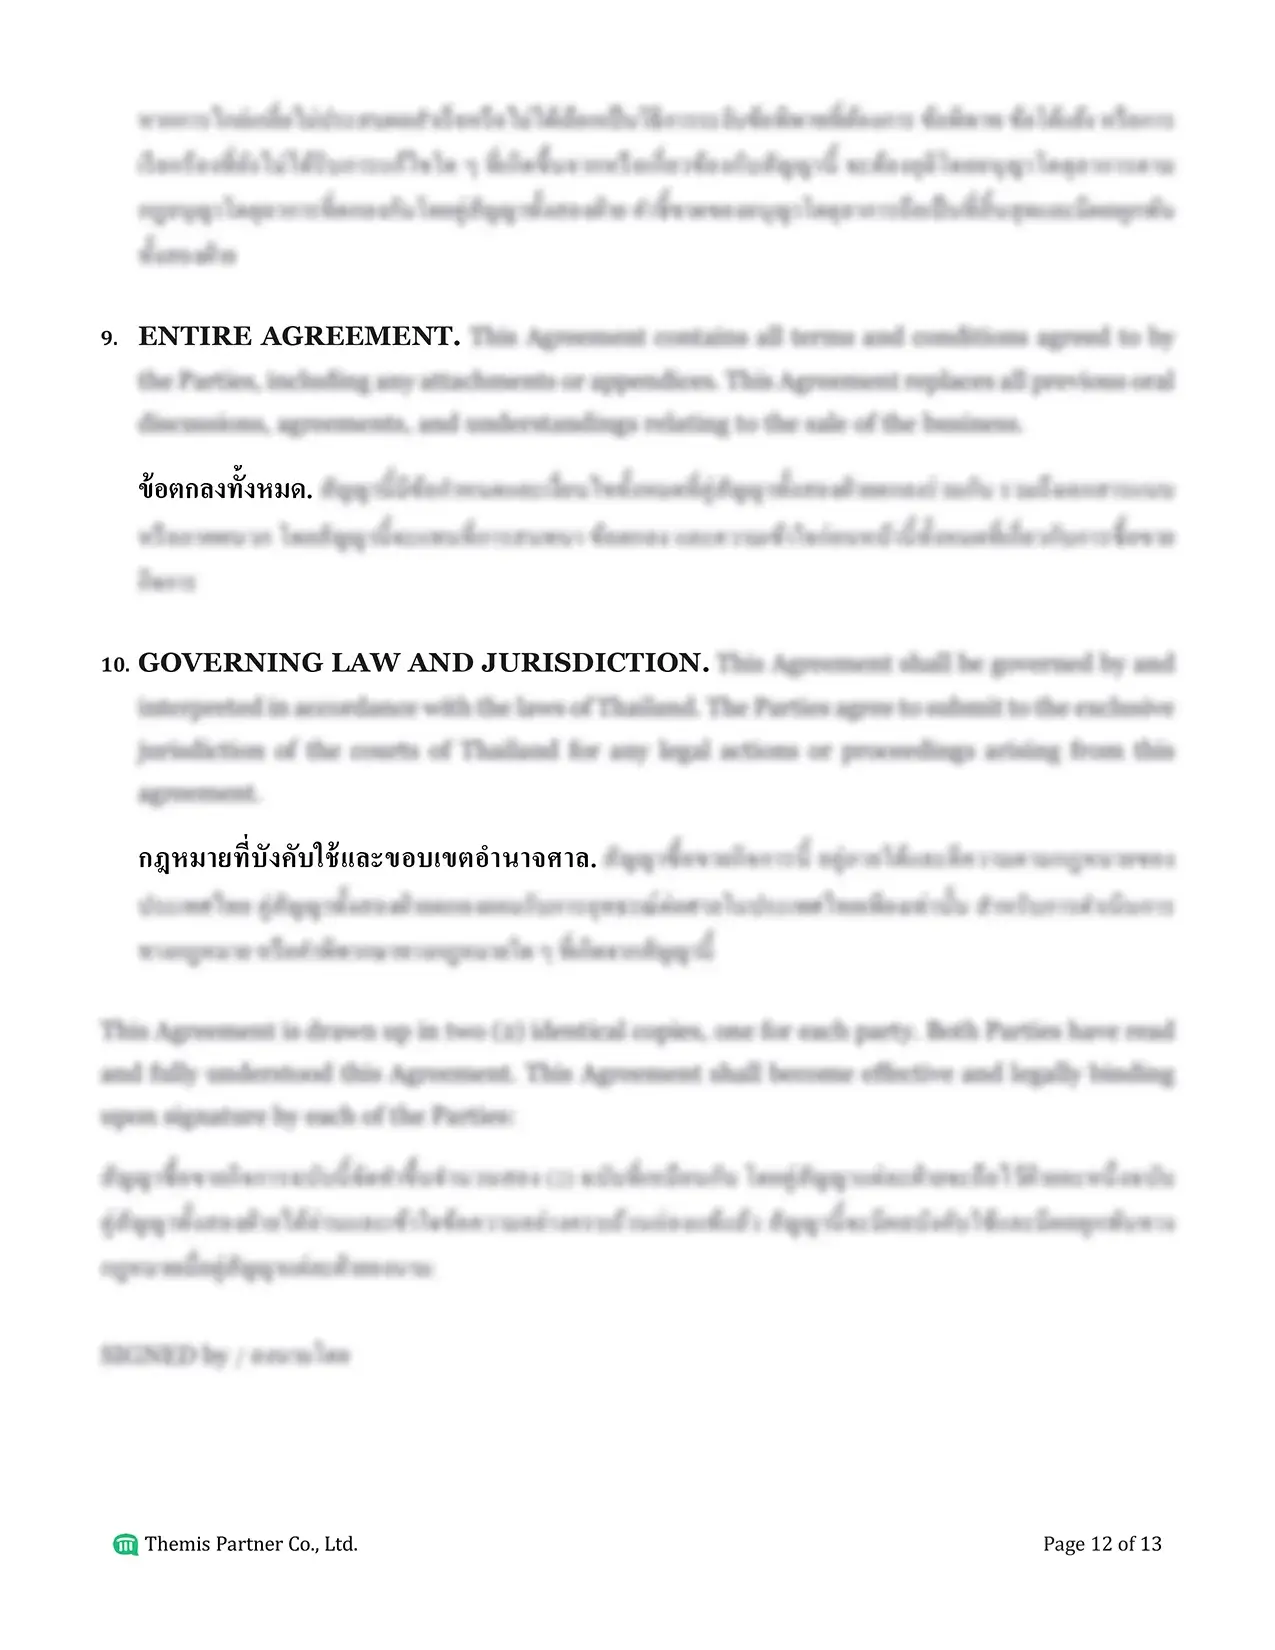 Business purchase agreement Thailand 12